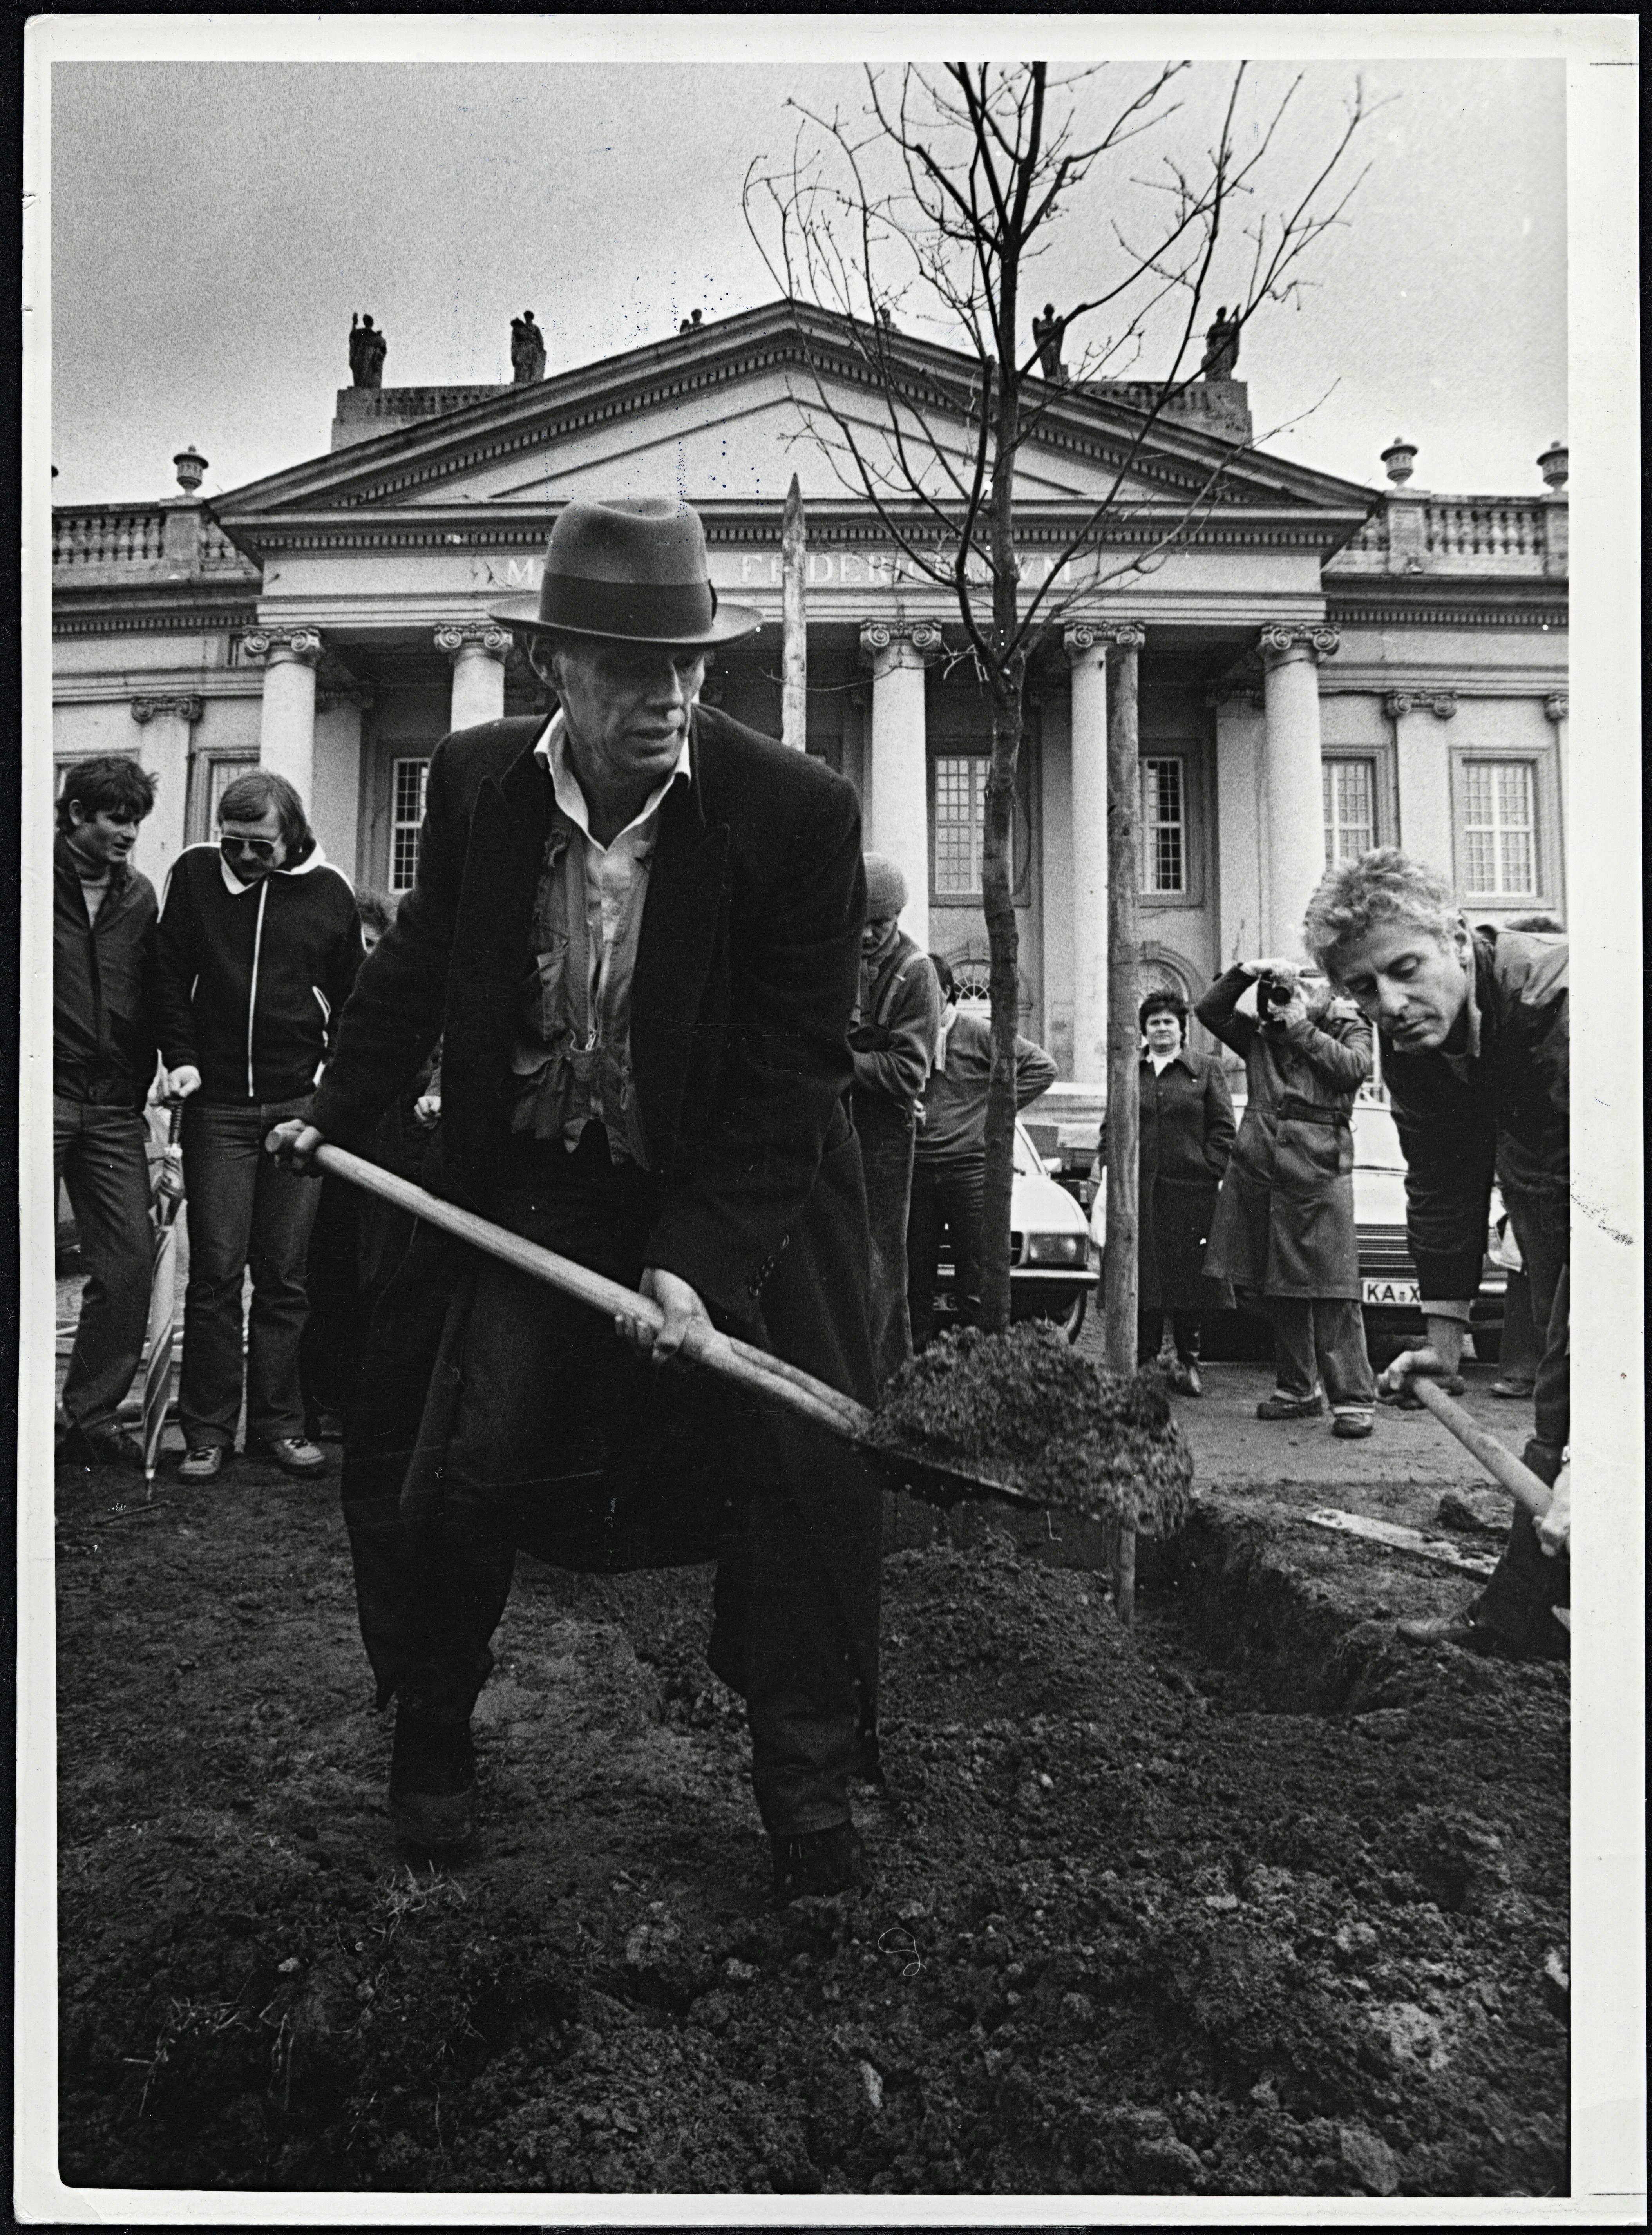 Man wearing long coat and hat digging hole to plant oak tree in front of museum building.